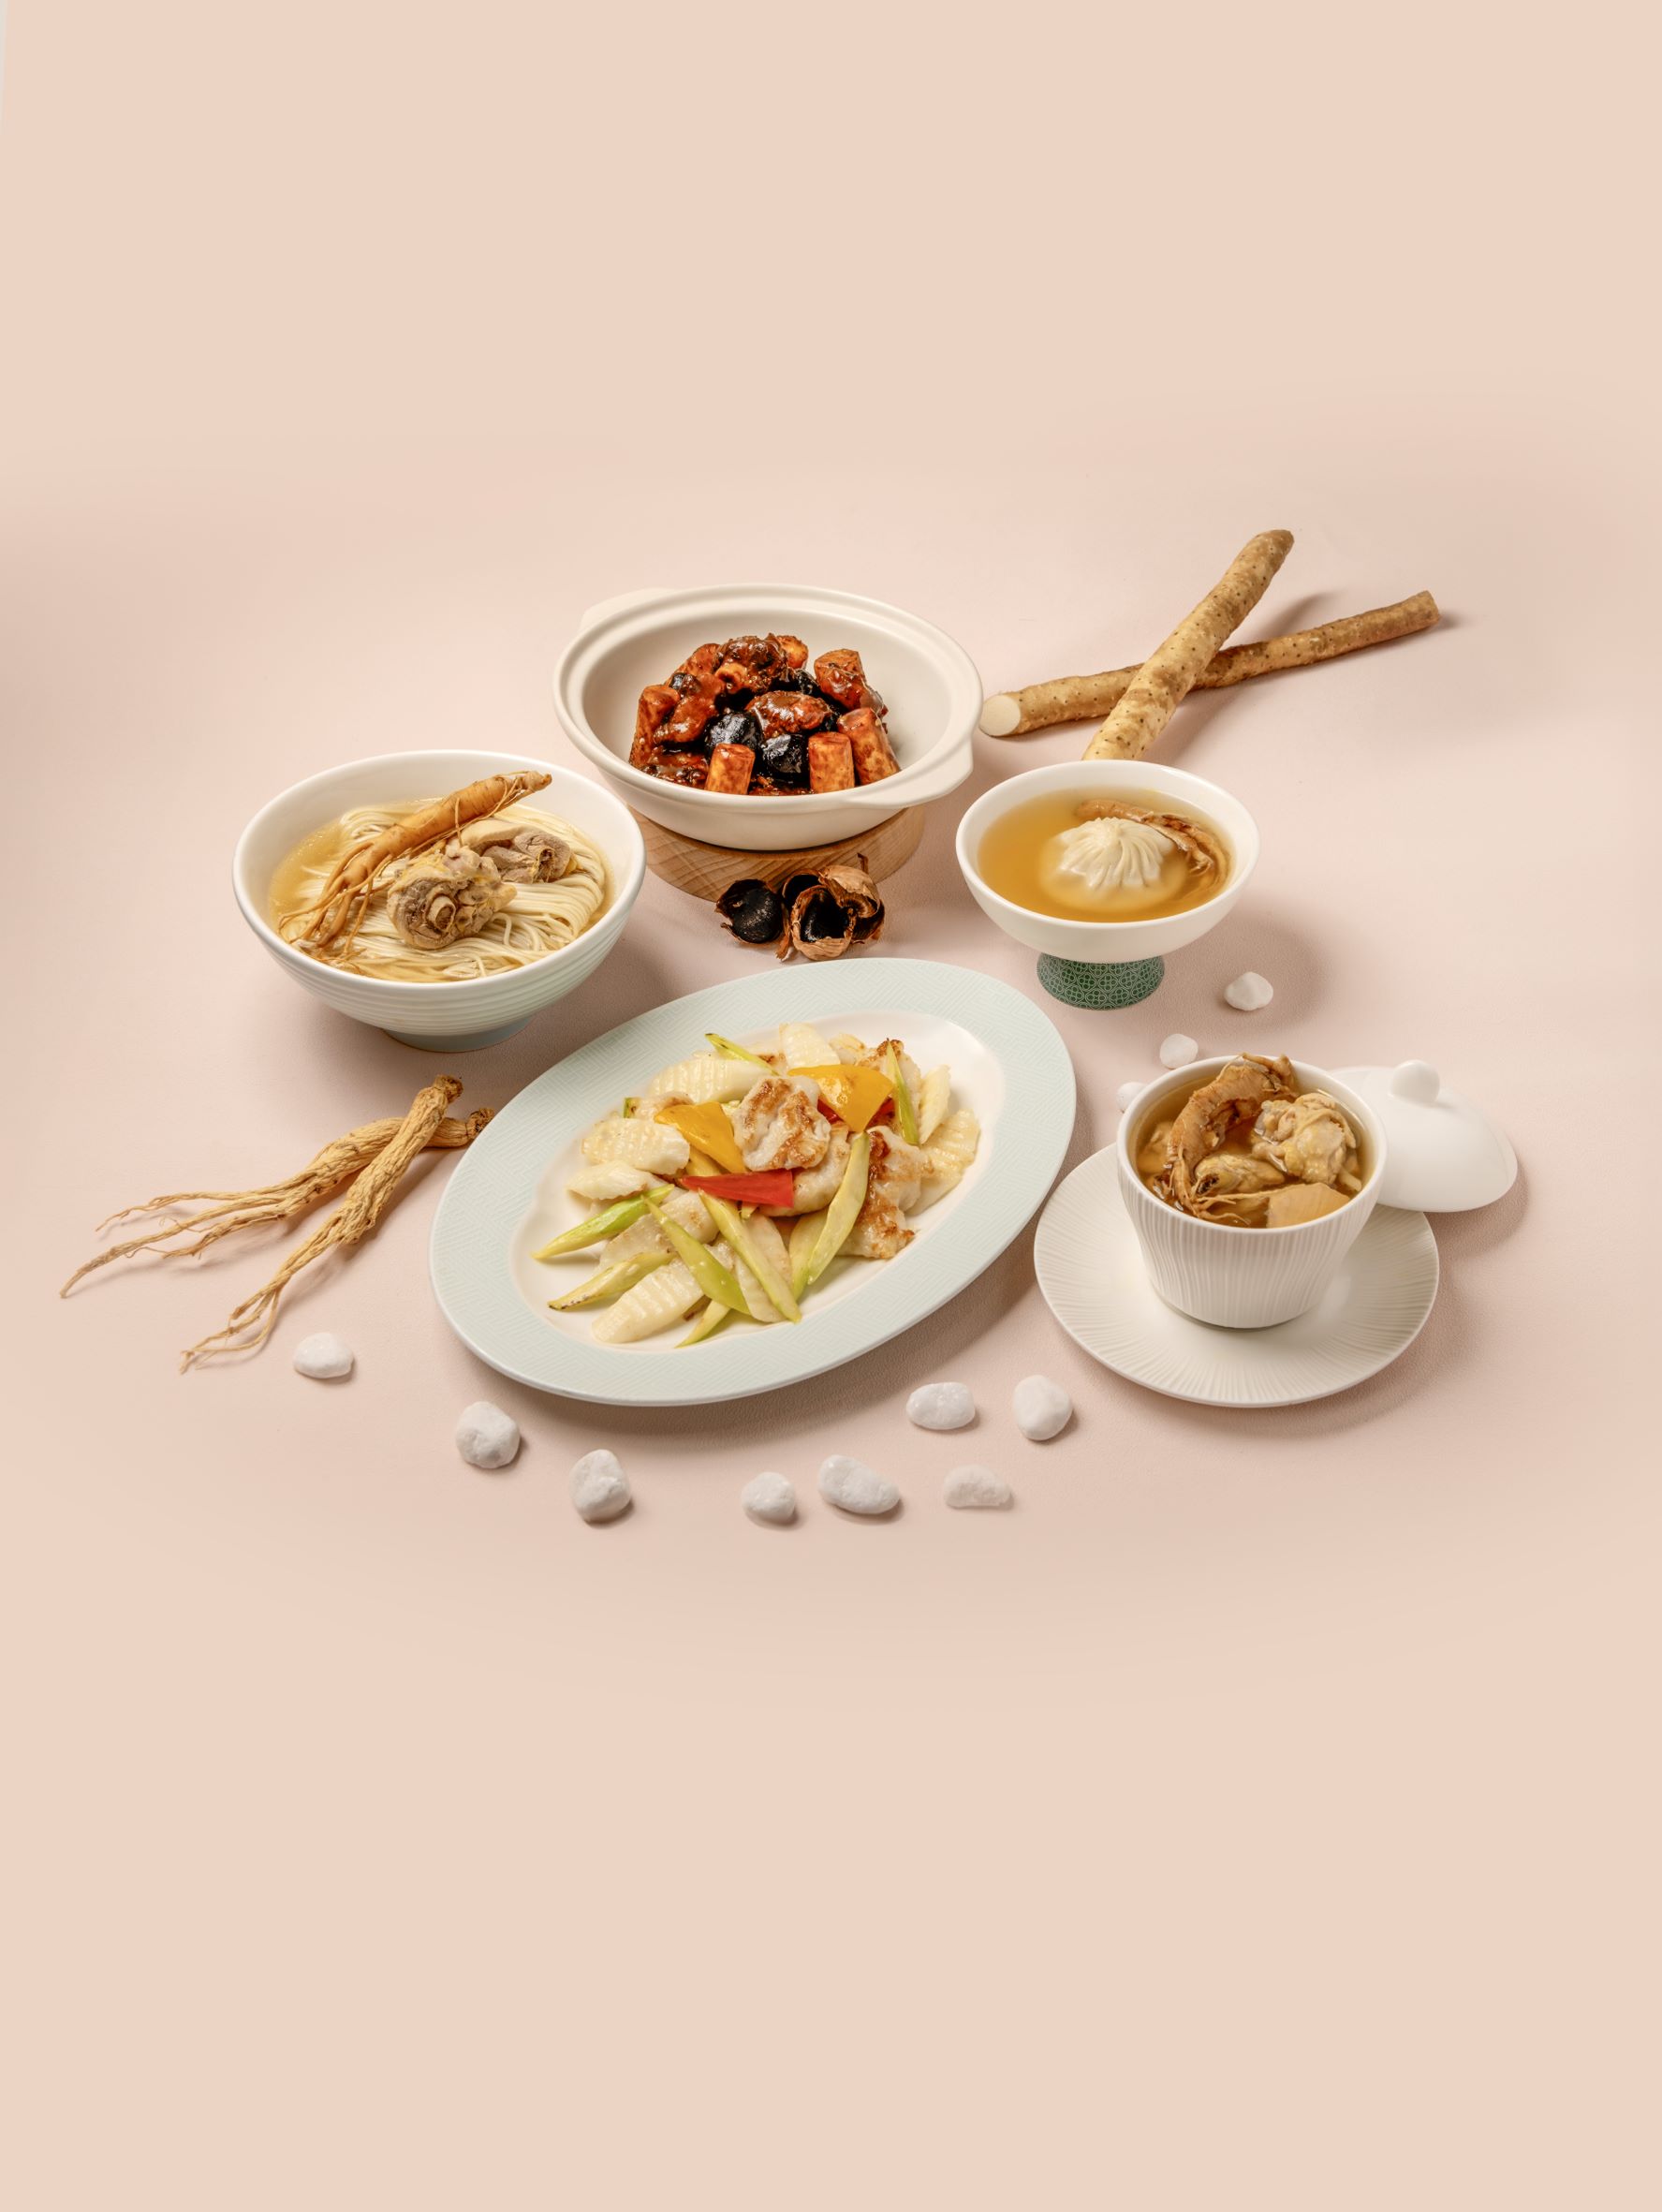 Brand New “Nourishing Menu” Introduced by Crystal Jade and First-ever Collaborated with JaneClare